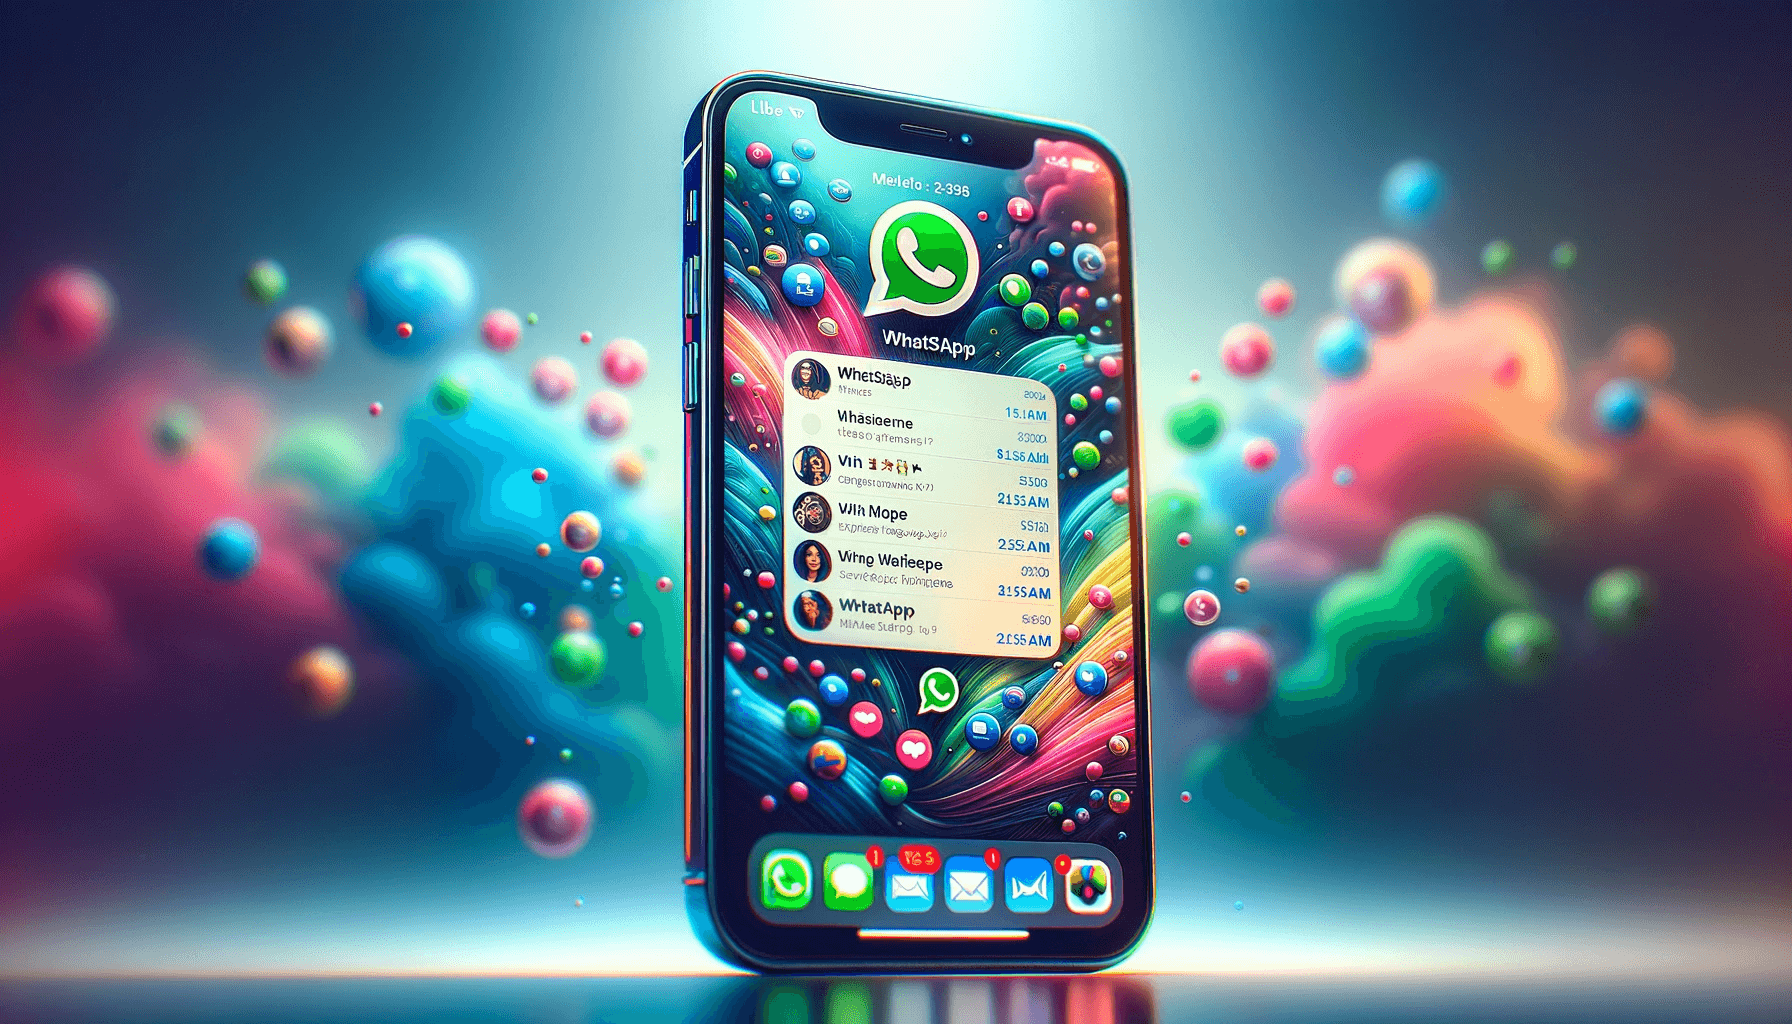 DALL·E 2023 11 16 17.49.40 A stunning digital illustration of WhatsApp on an iPhone. The iPhone is depicted with high detail showcasing its sleek design and clear screen. The s